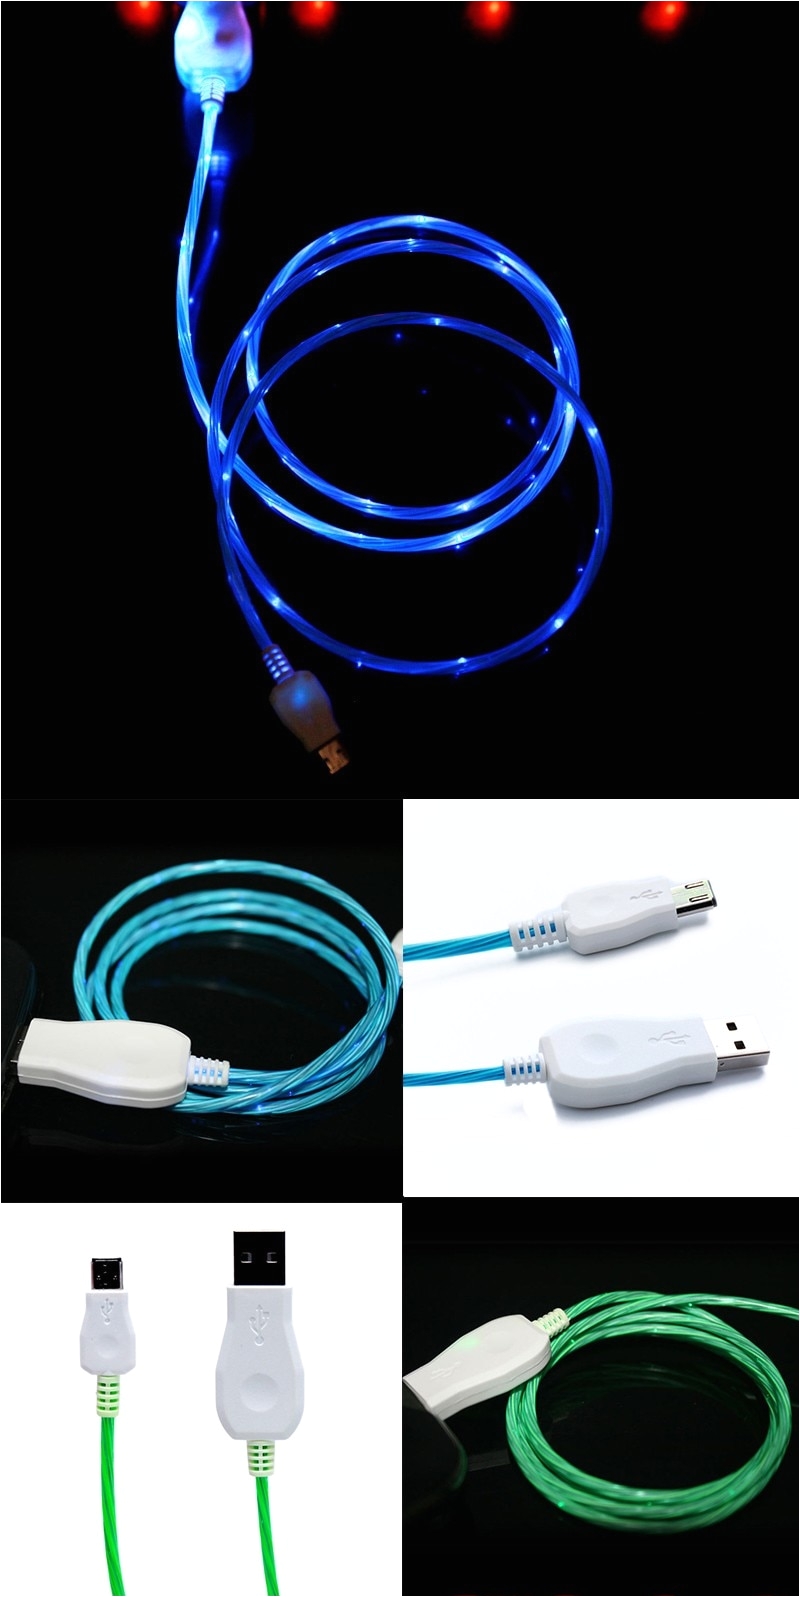 beautiful colors and awesome leds turn a boring cable into a very cool charger